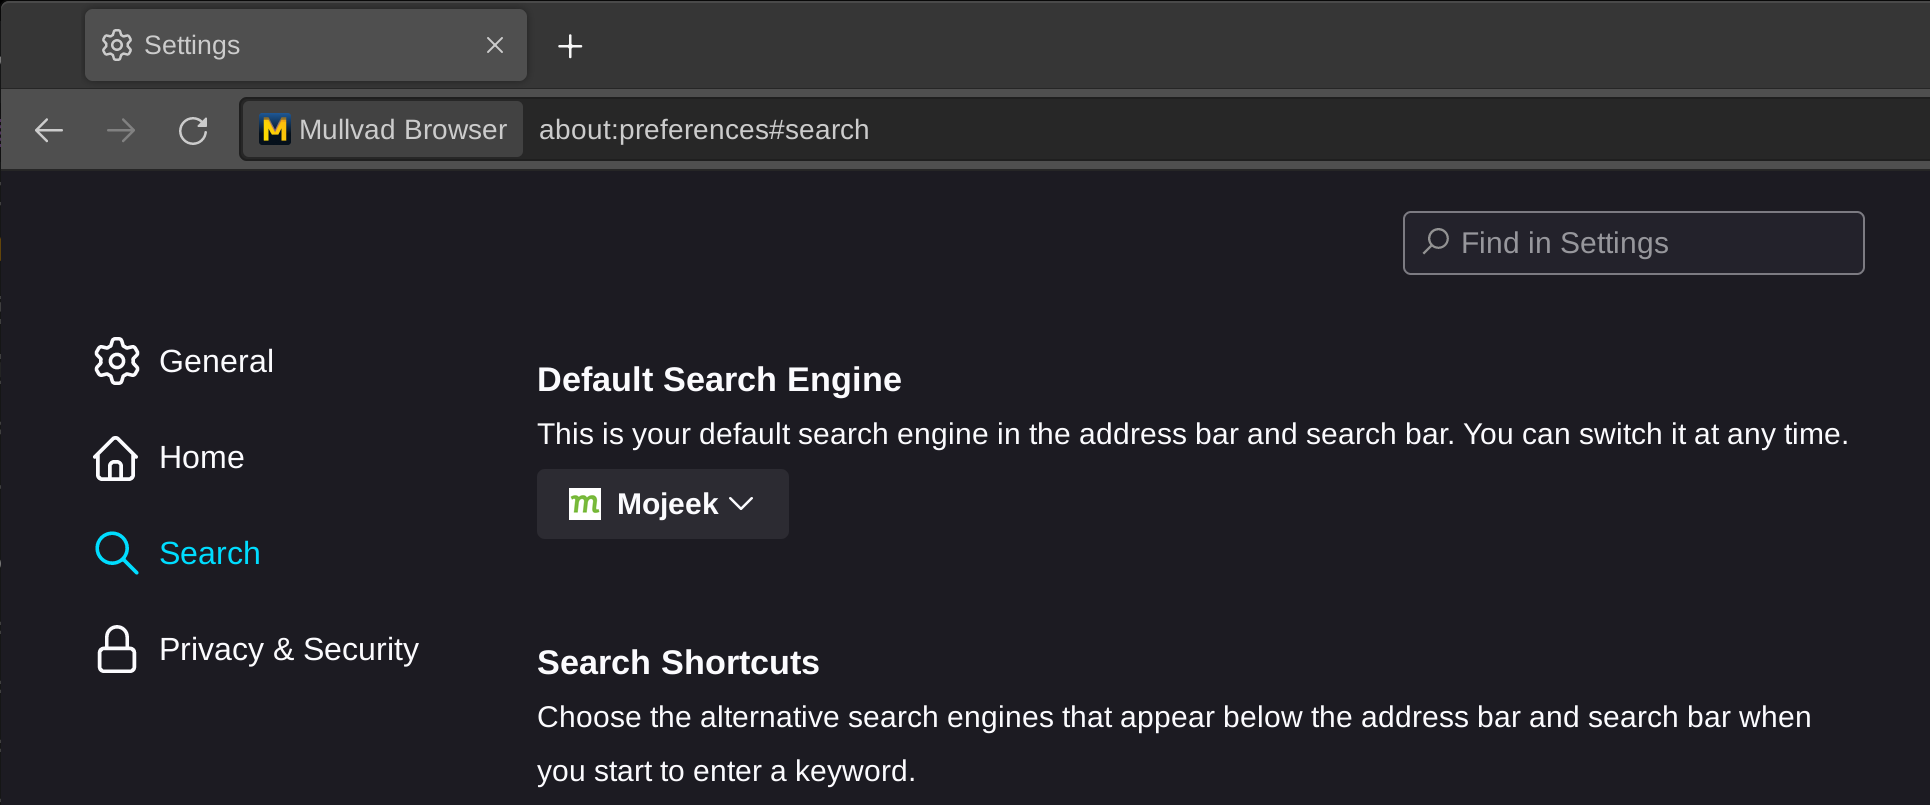 Changing Mullvad's default search engine to Mojeek.